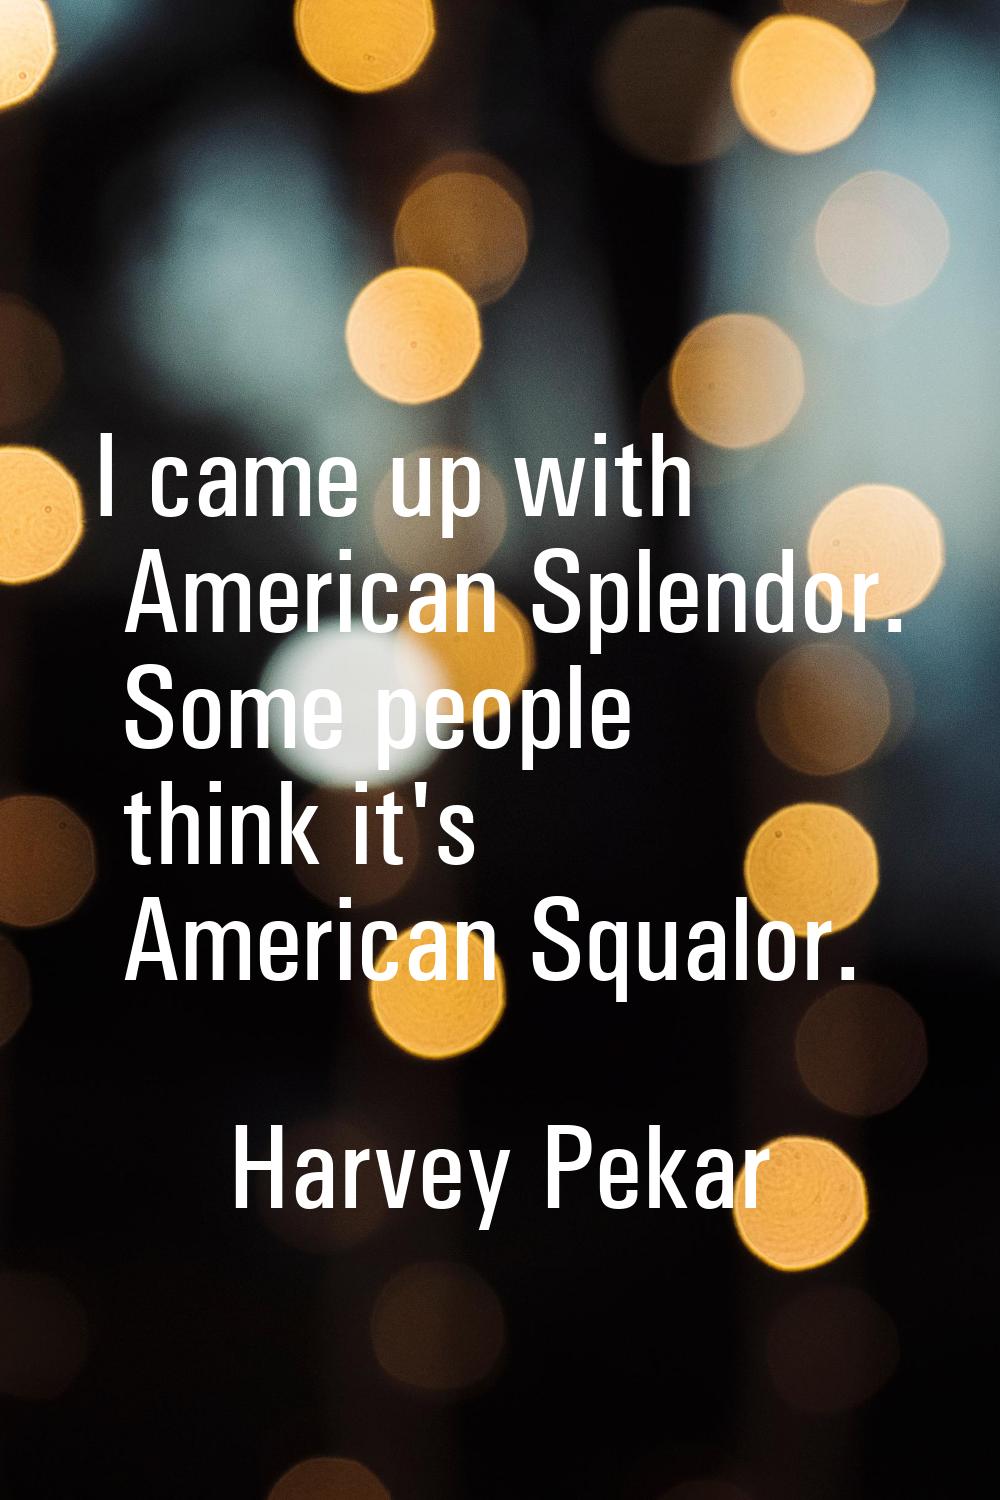 I came up with American Splendor. Some people think it's American Squalor.